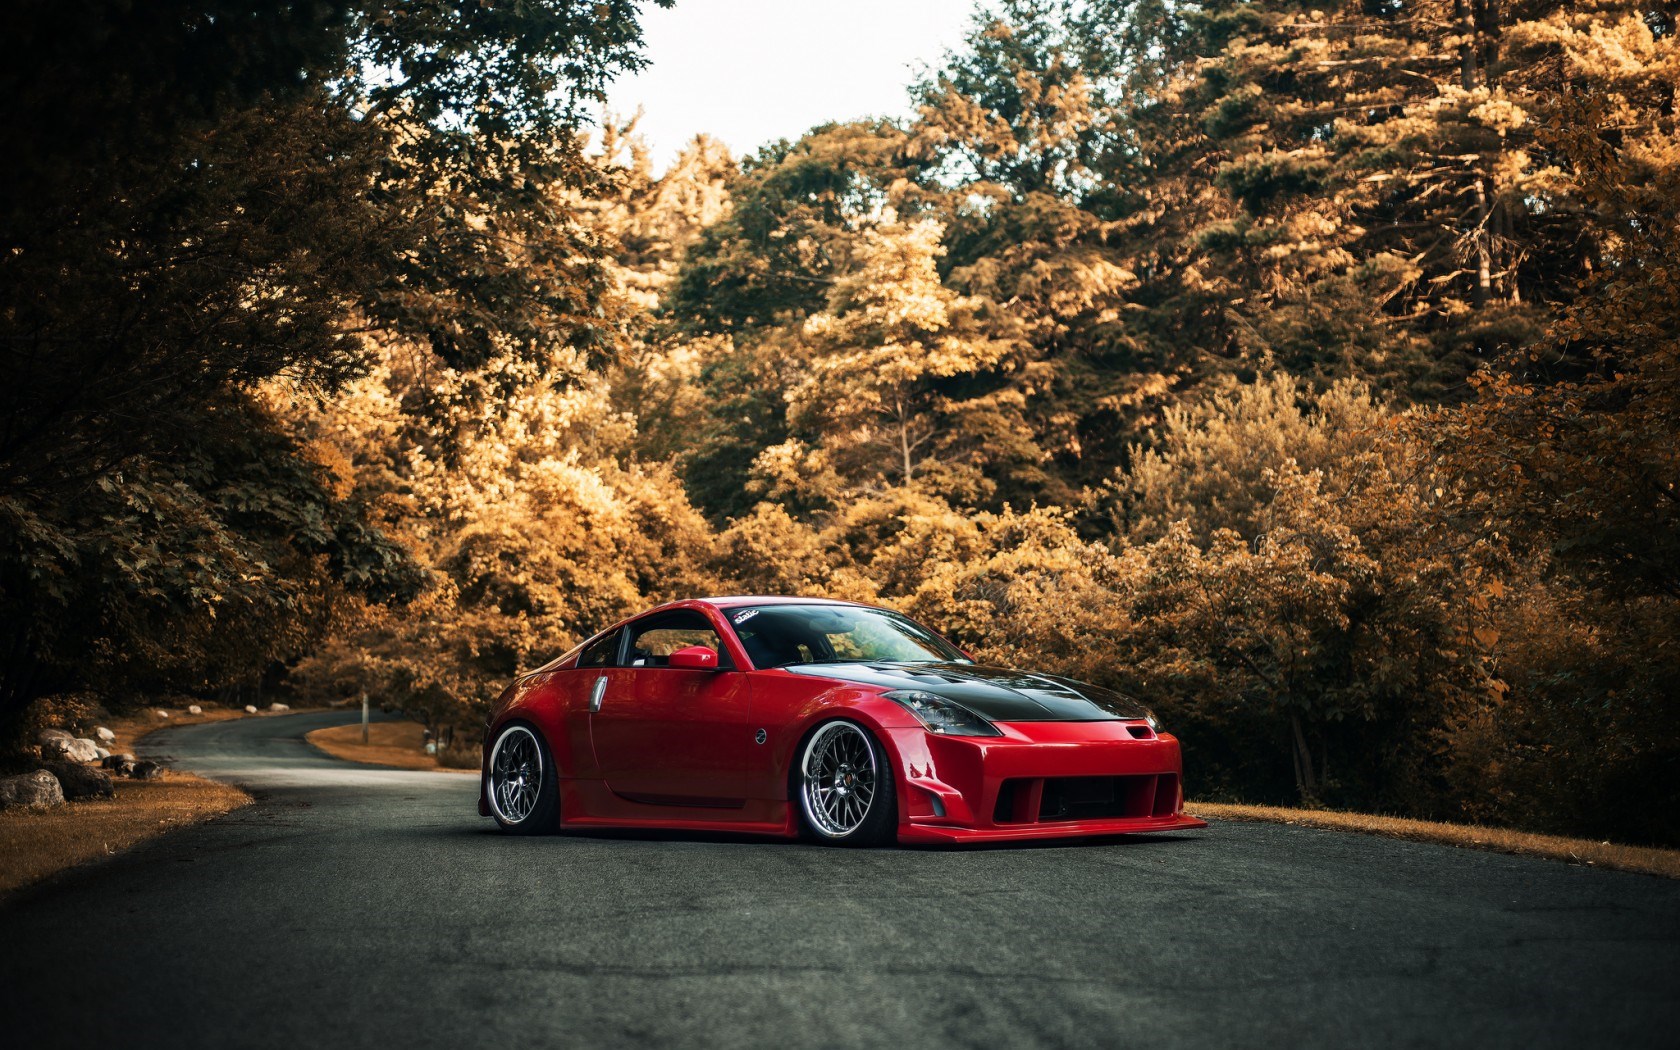 Nissan 350Z Red Car Tuning Road Autumn